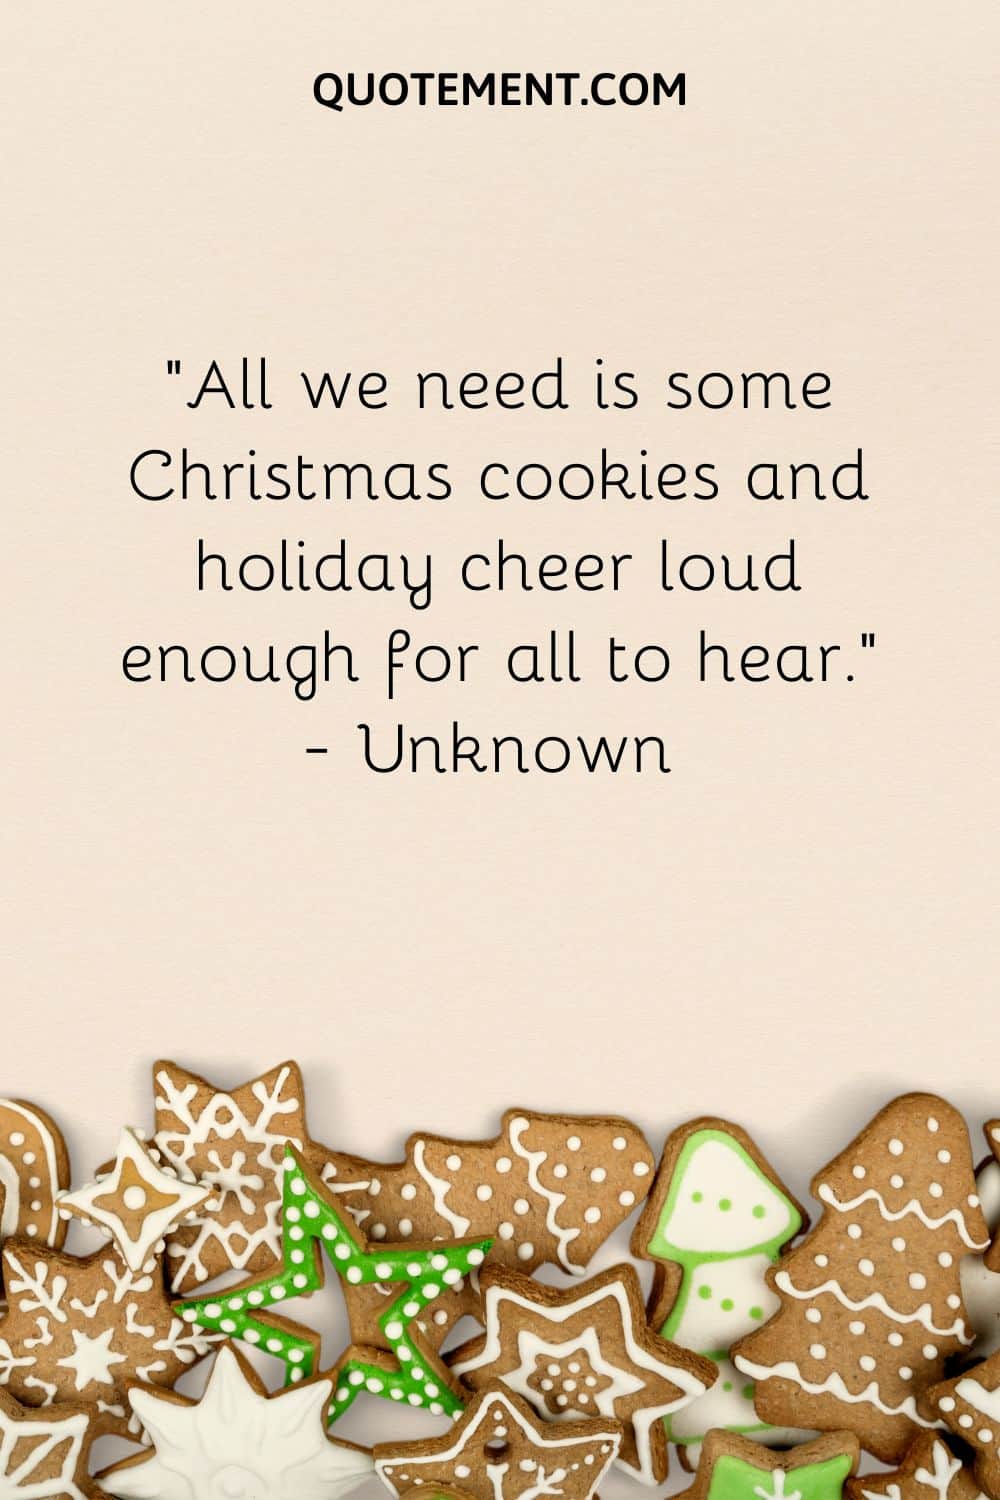 All we need is some Christmas cookies and holiday cheer loud enough for all to hear